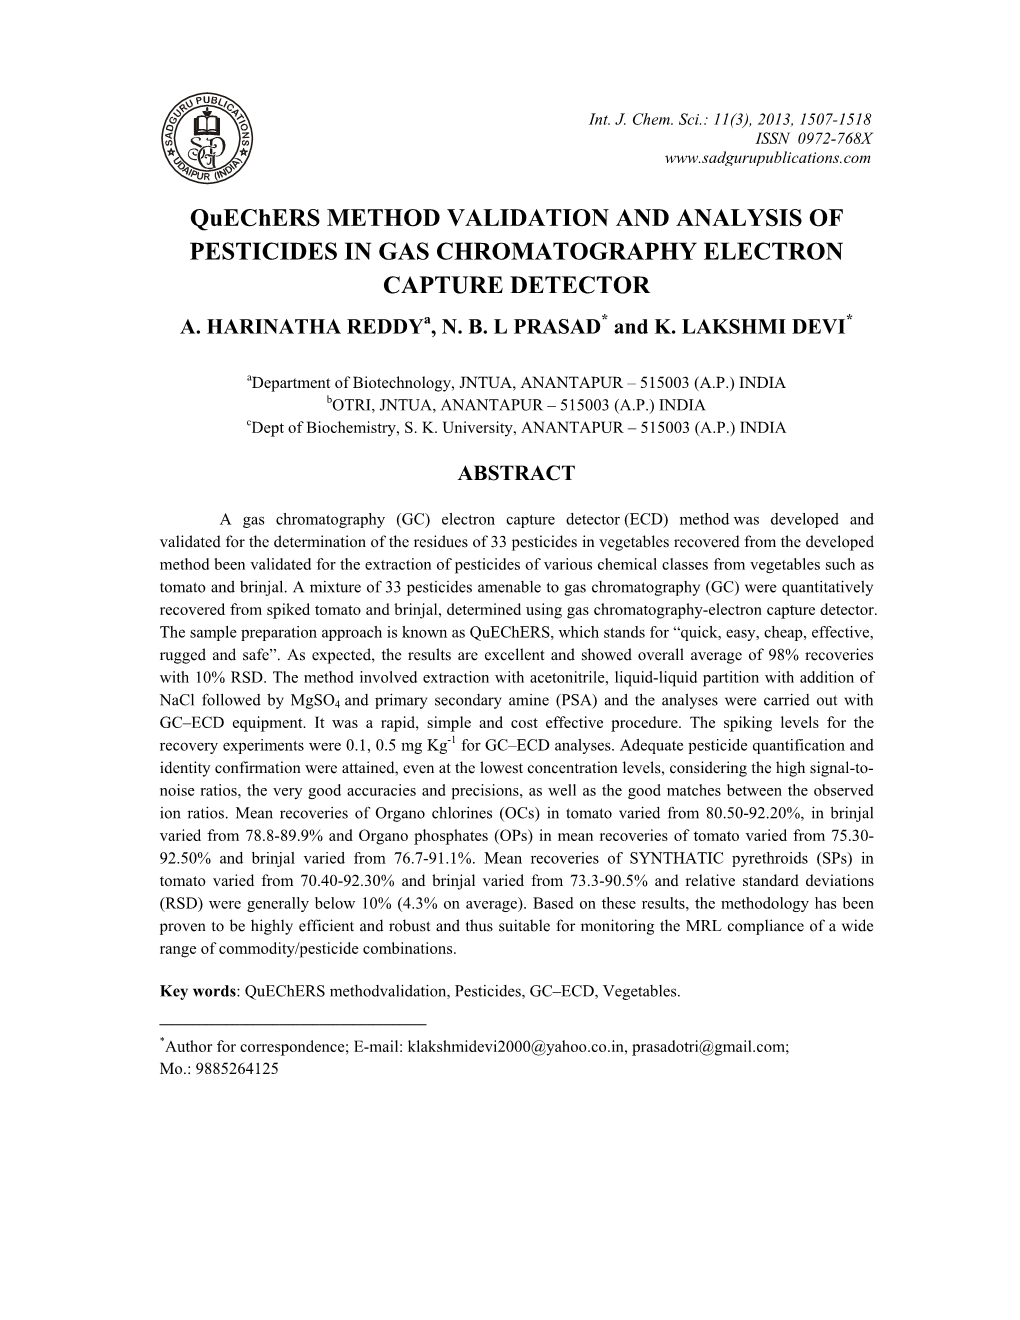 Quechers METHOD VALIDATION and ANALYSIS of PESTICIDES in GAS CHROMATOGRAPHY ELECTRON CAPTURE DETECTOR A